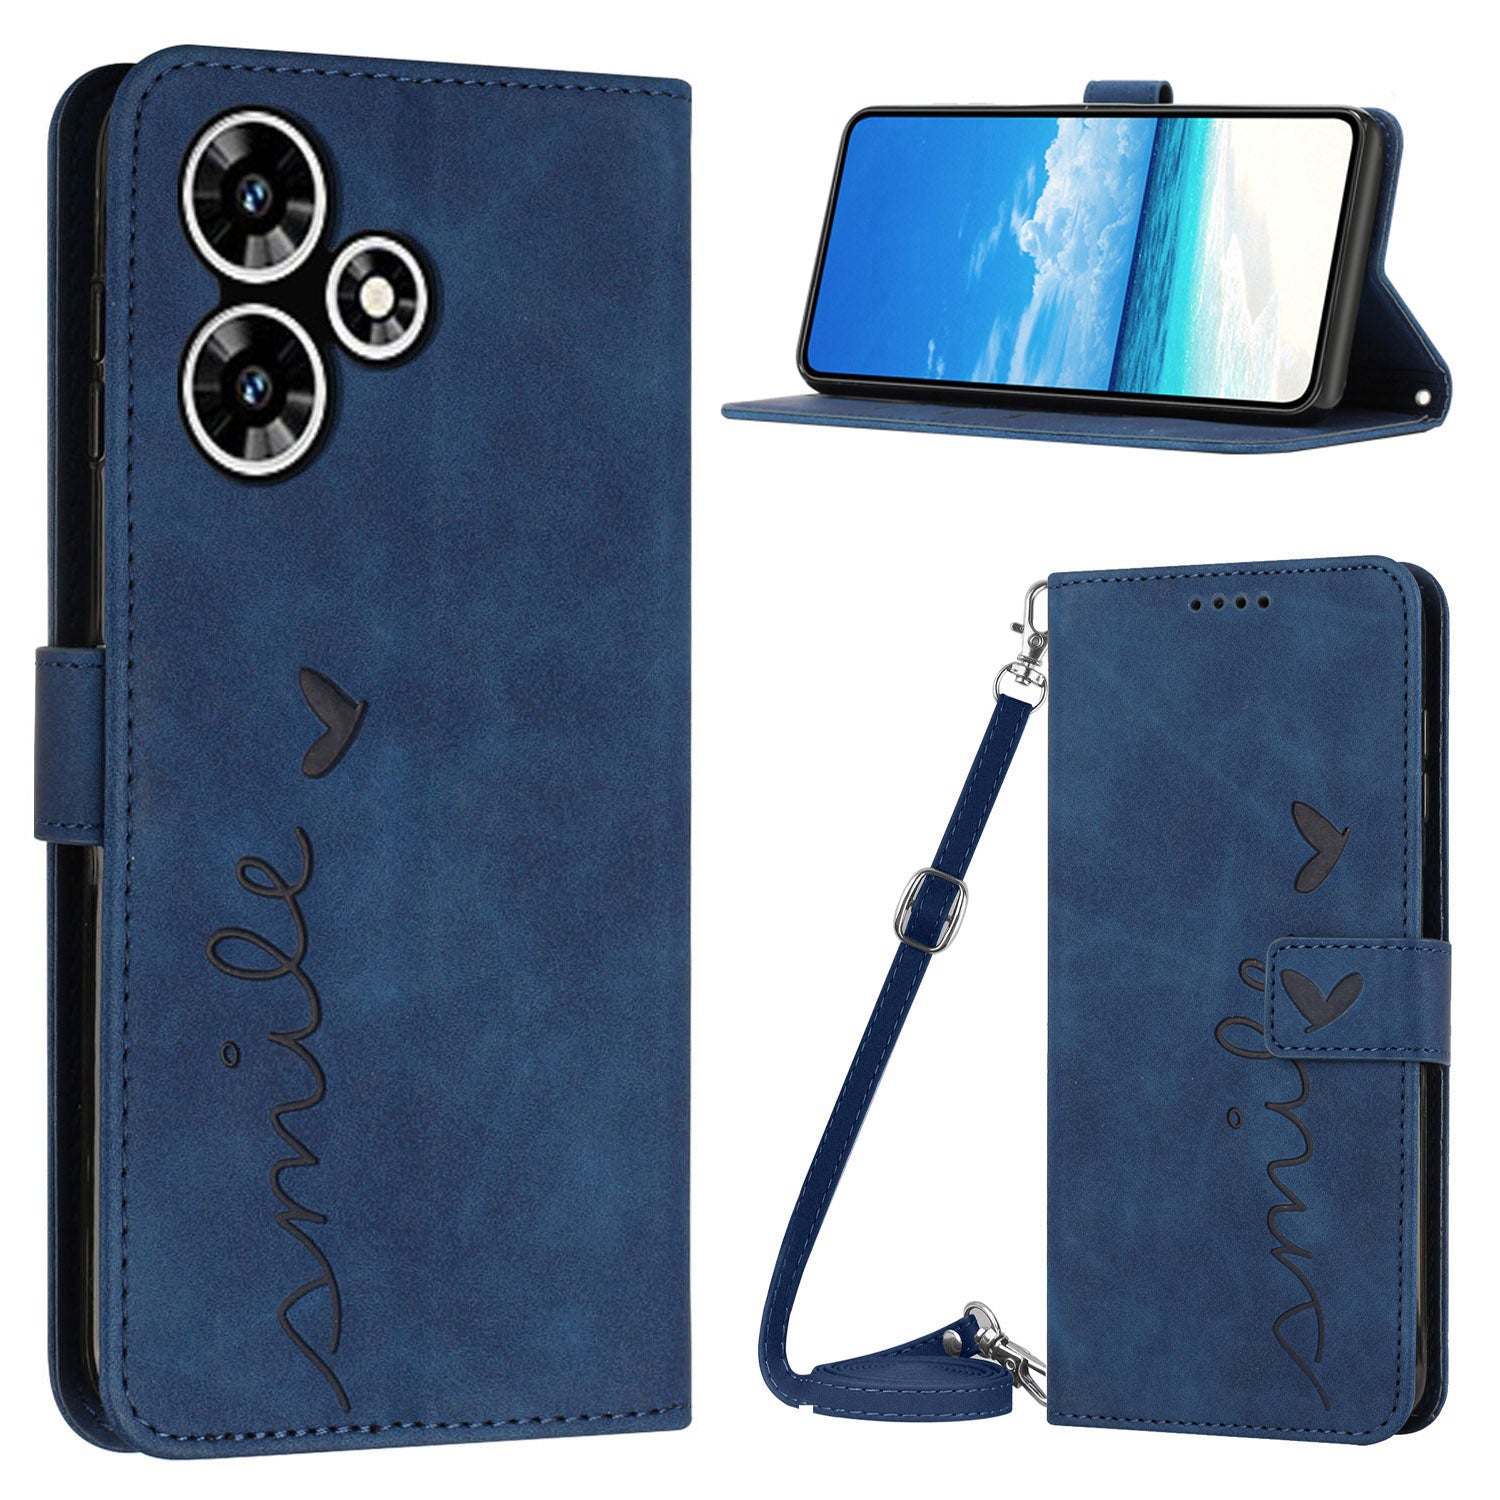 Wallet PU Leather Case for Infinix Hot 30 , Heart Shape Phone Stand Cover with Shoulder Strap - Sapphire